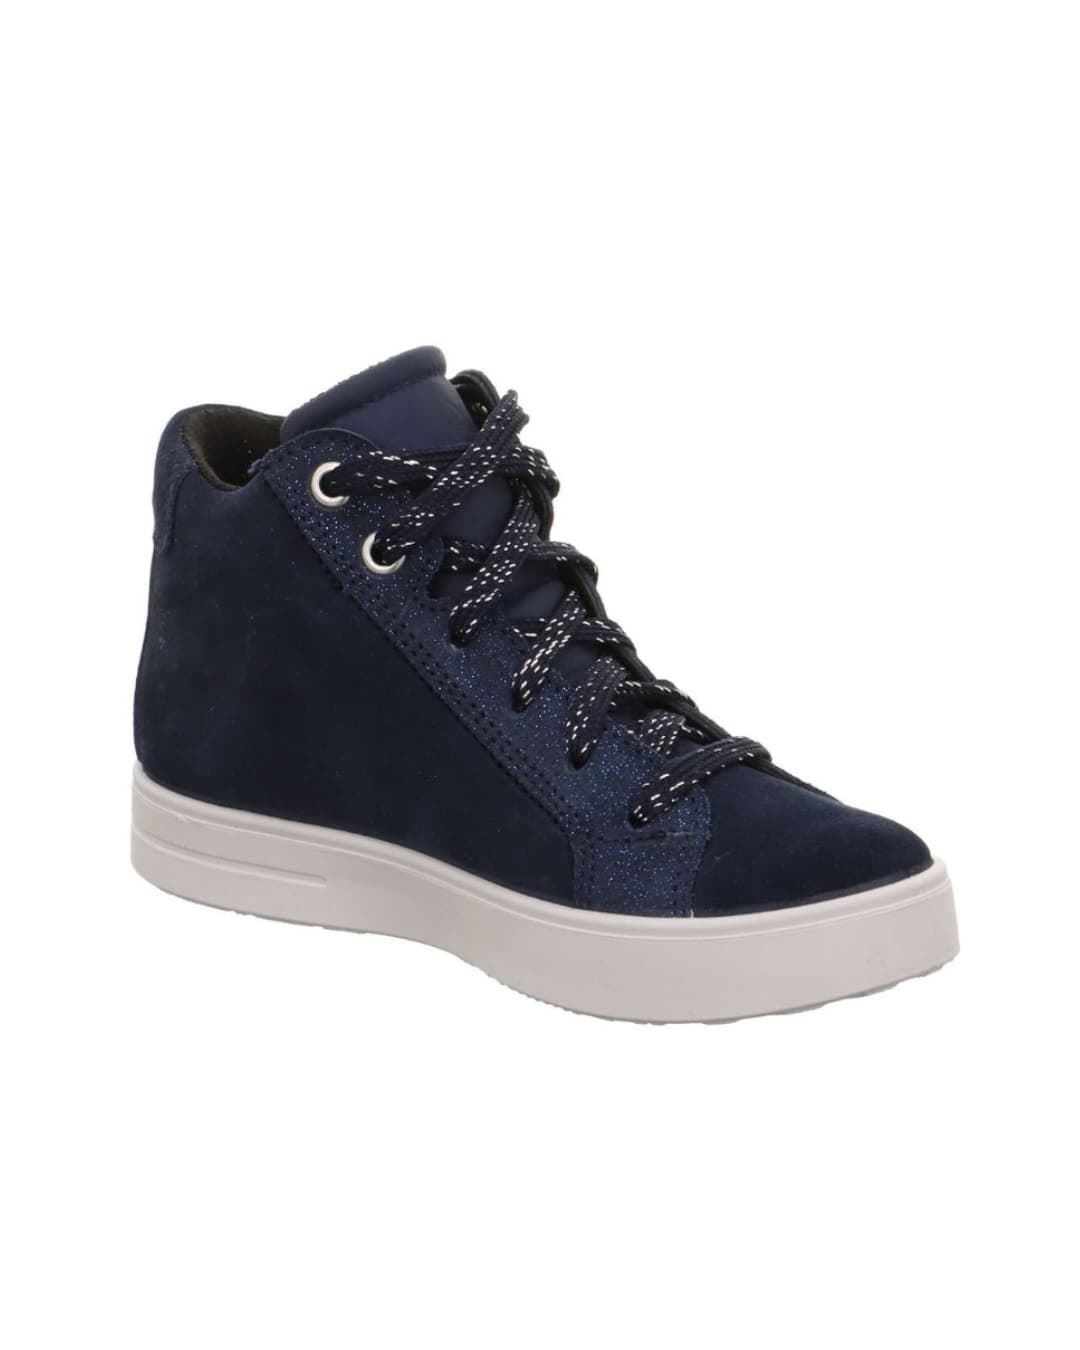 Superfit Gore-tex Ankle Boot Girl Navy Blue - Image 2